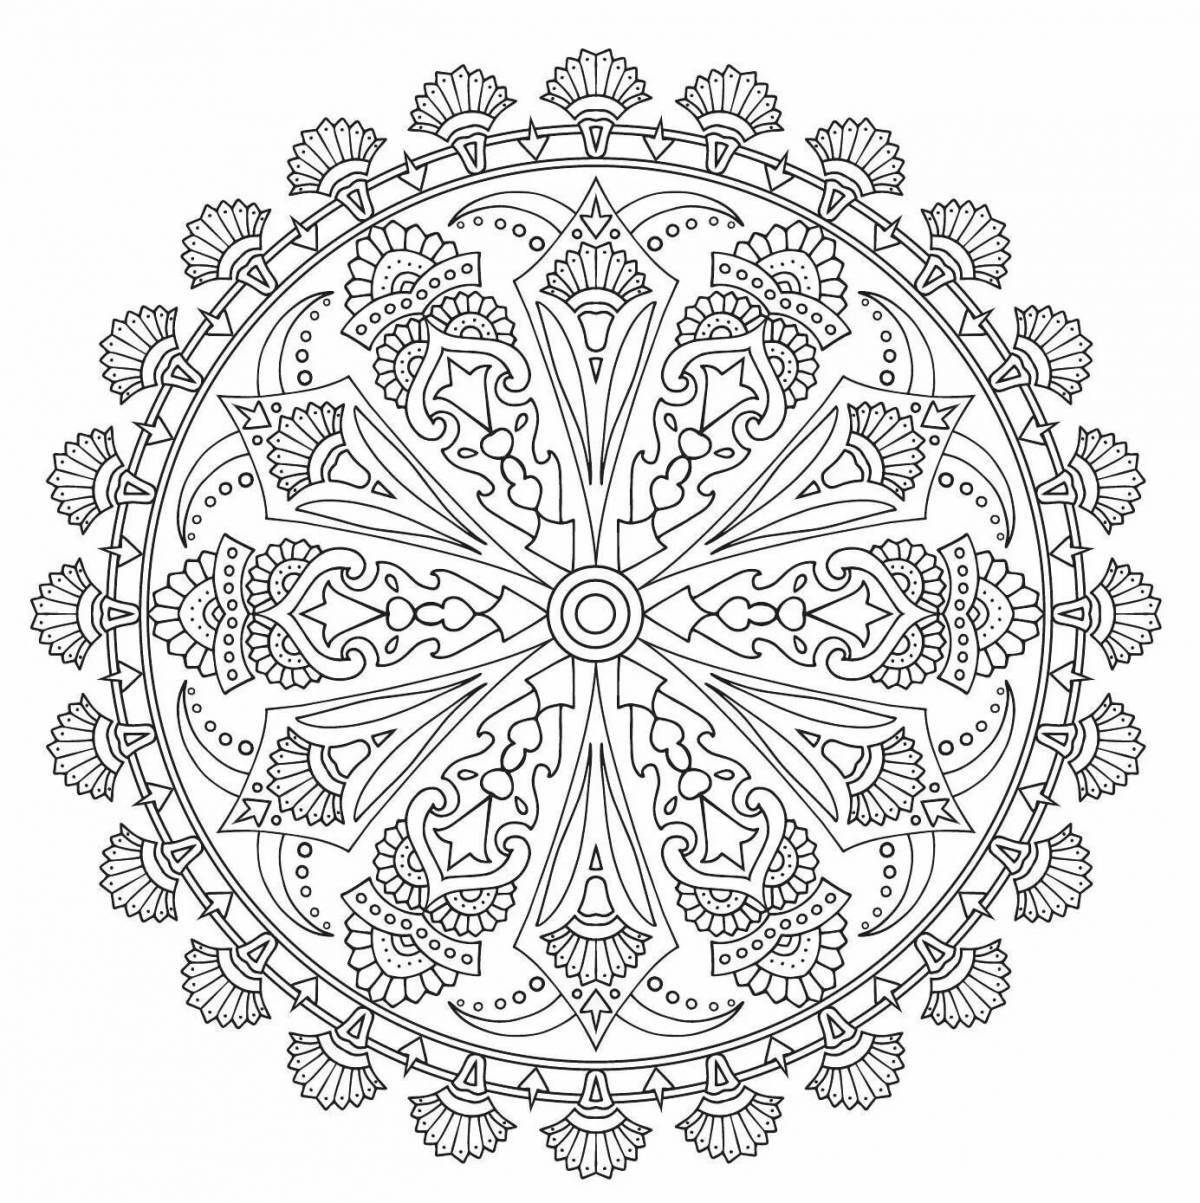 Exalted coloring mandala of peace and tranquility